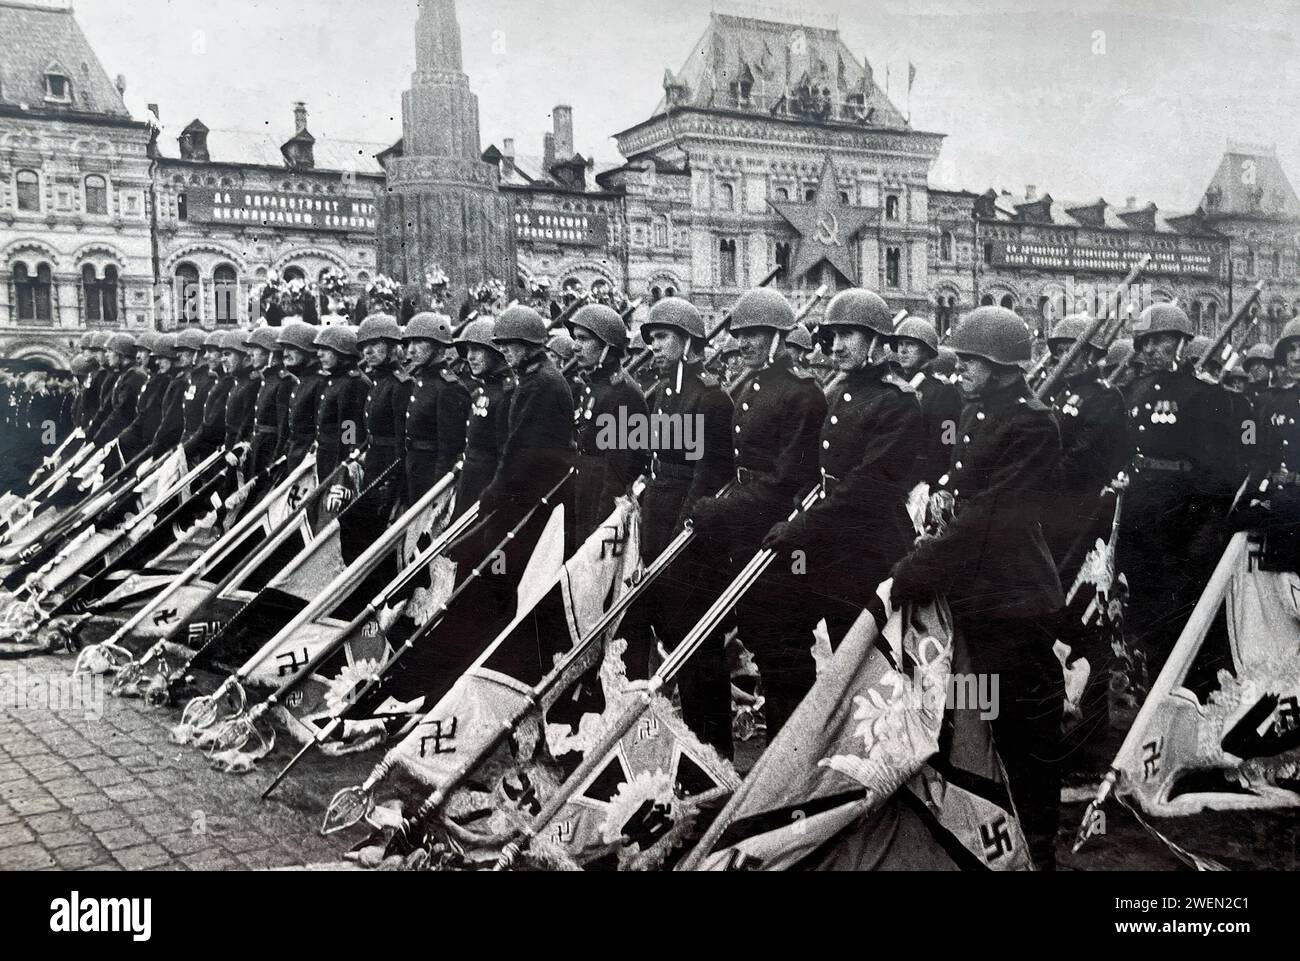 RED ARMY VICTORY PARADE in Red Square, Moscow, 24 June 1945. Russian soldiers parading captured German unit standards. Stock Photo